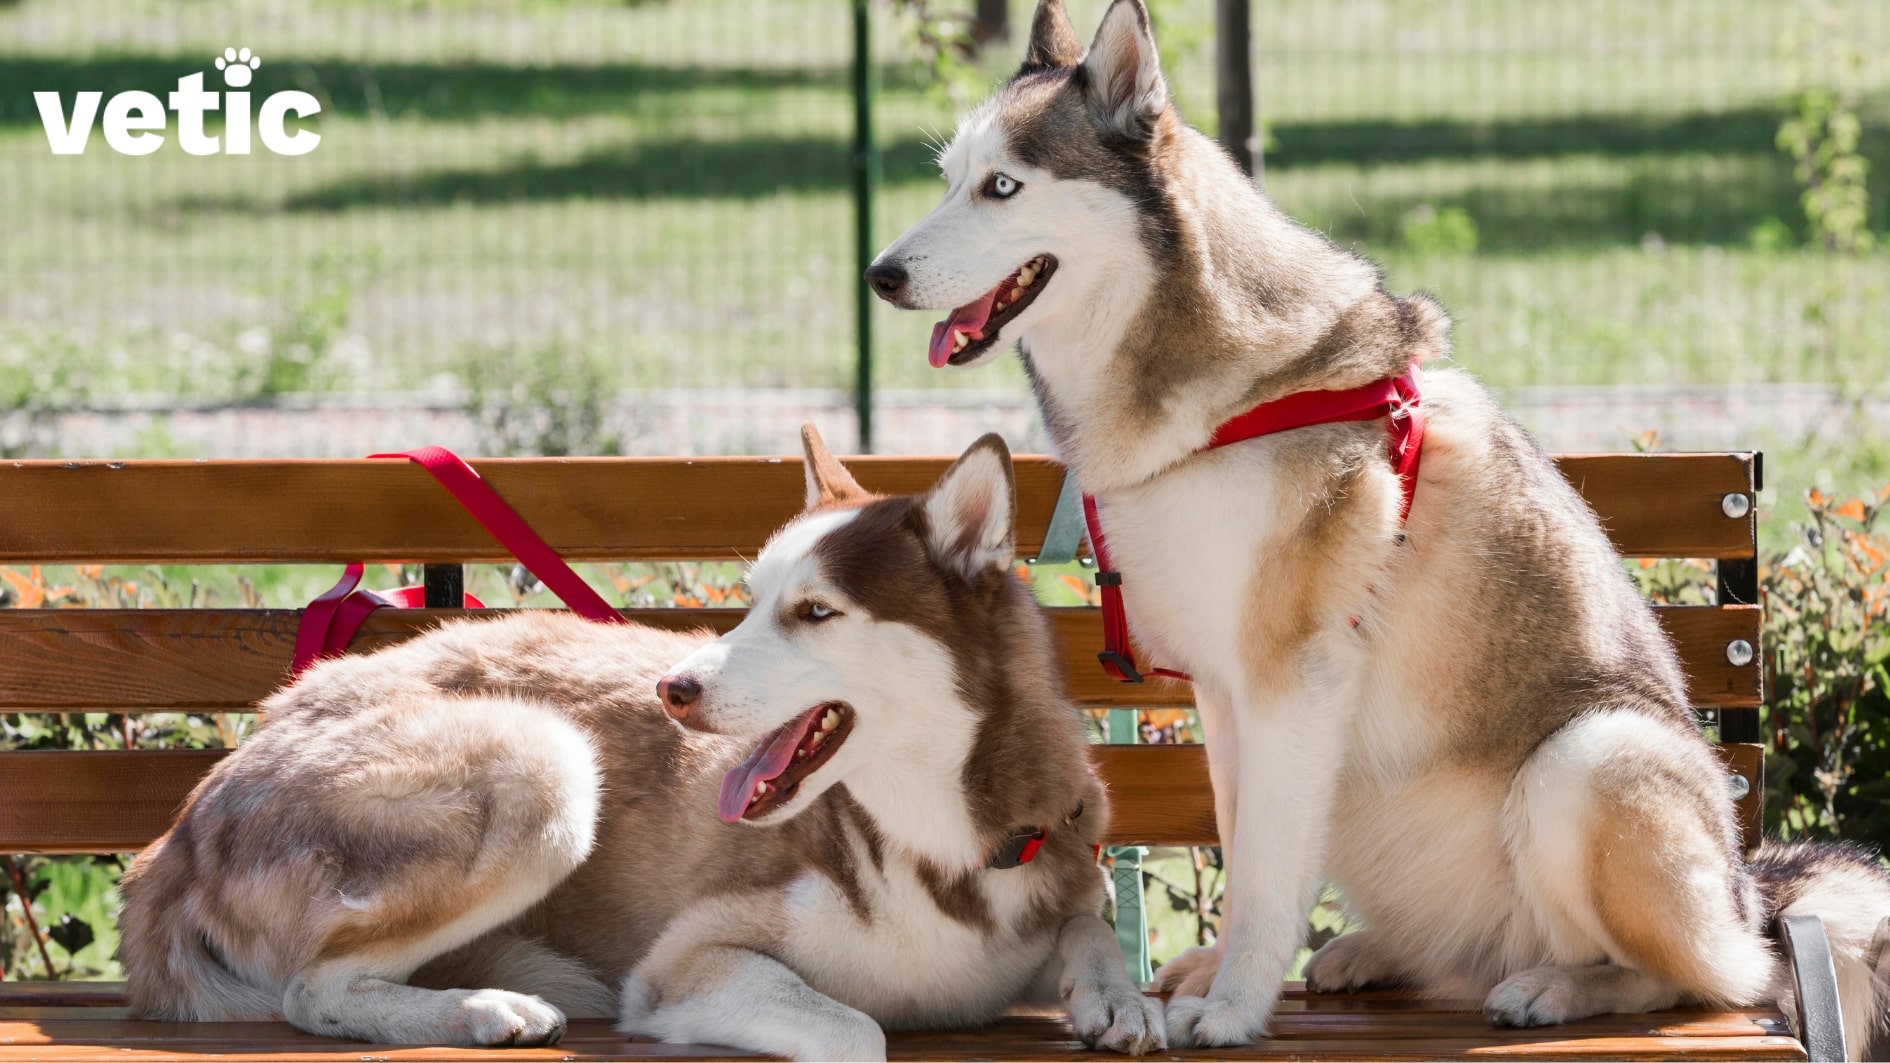 Two brown and white huskies with blue eyes, wearing red harnesses, one sitting upright and the other one curled of on all fours sitting on a brown wooden bench at a park. Huskies in India should not be taken outside in excess heat. take them out when it's cool.